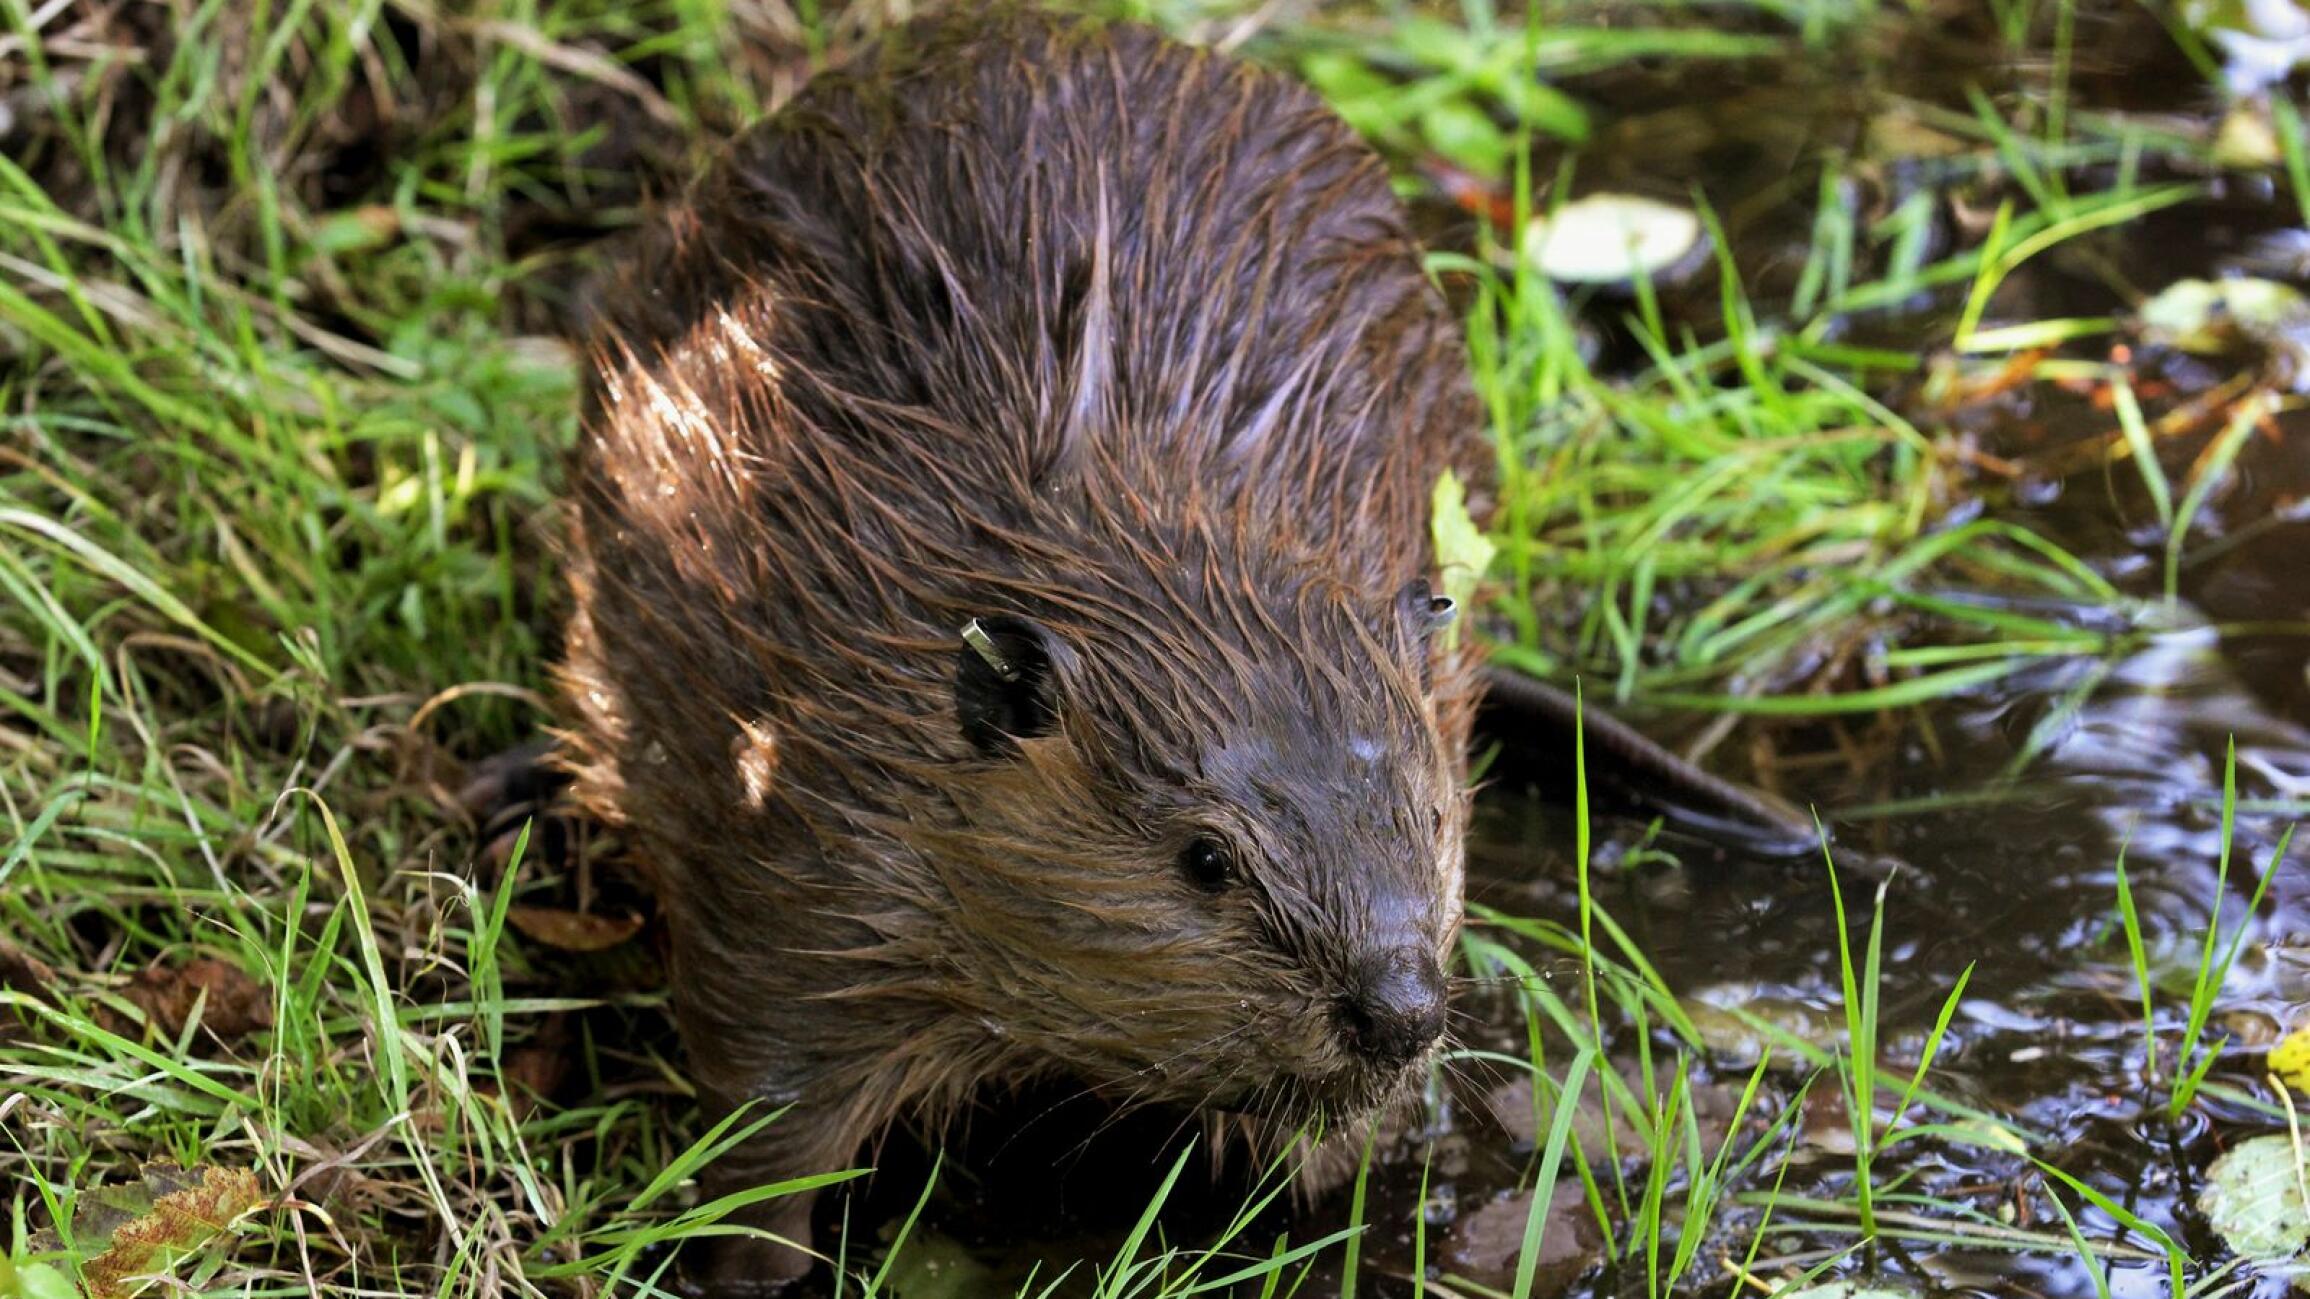 Beavers making comeback in Connecticut. Here's why that matters.